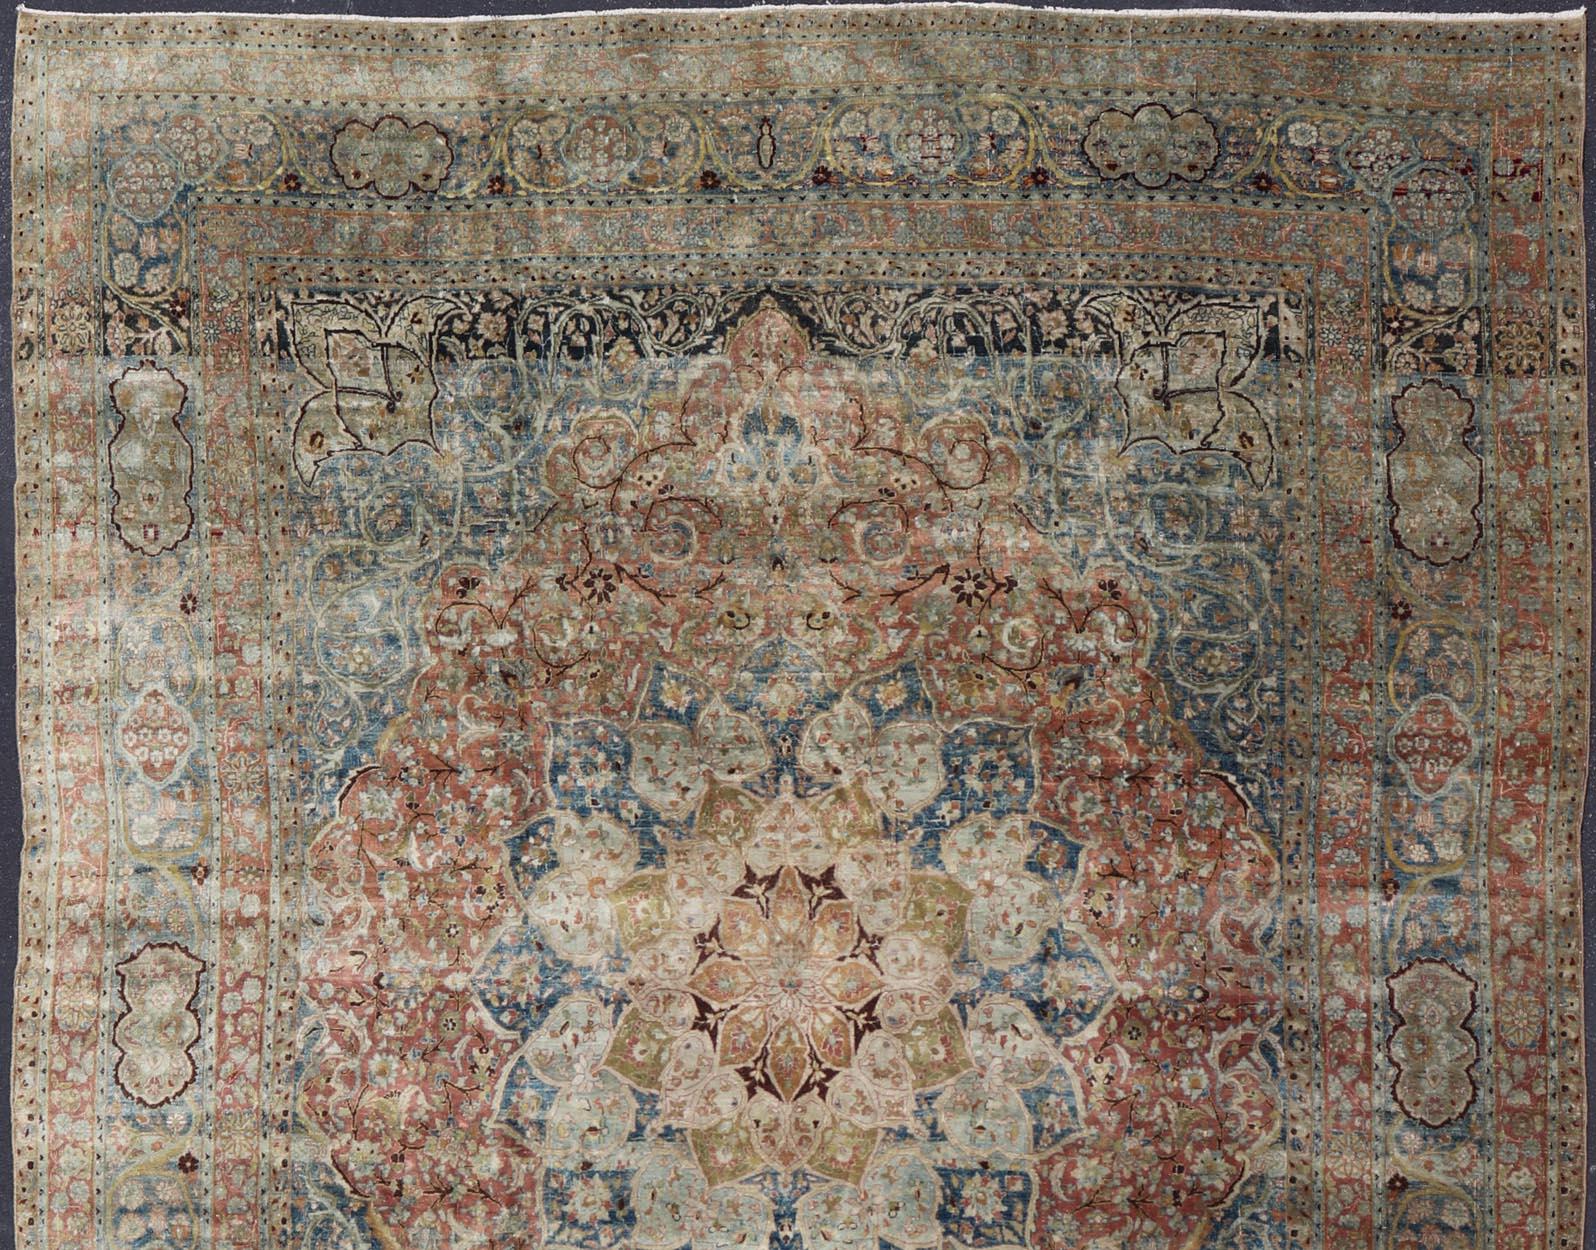 Large antique Persian Mashhad carpet with colorful floral and medallion design. Persian Mashhad floral design. Keivan Woven Arts / rug 17-0602, country of origin / type: Iran / Mashhad, circa 1930 

Measures: 12'11 x 16'3 

Soft to the touch with